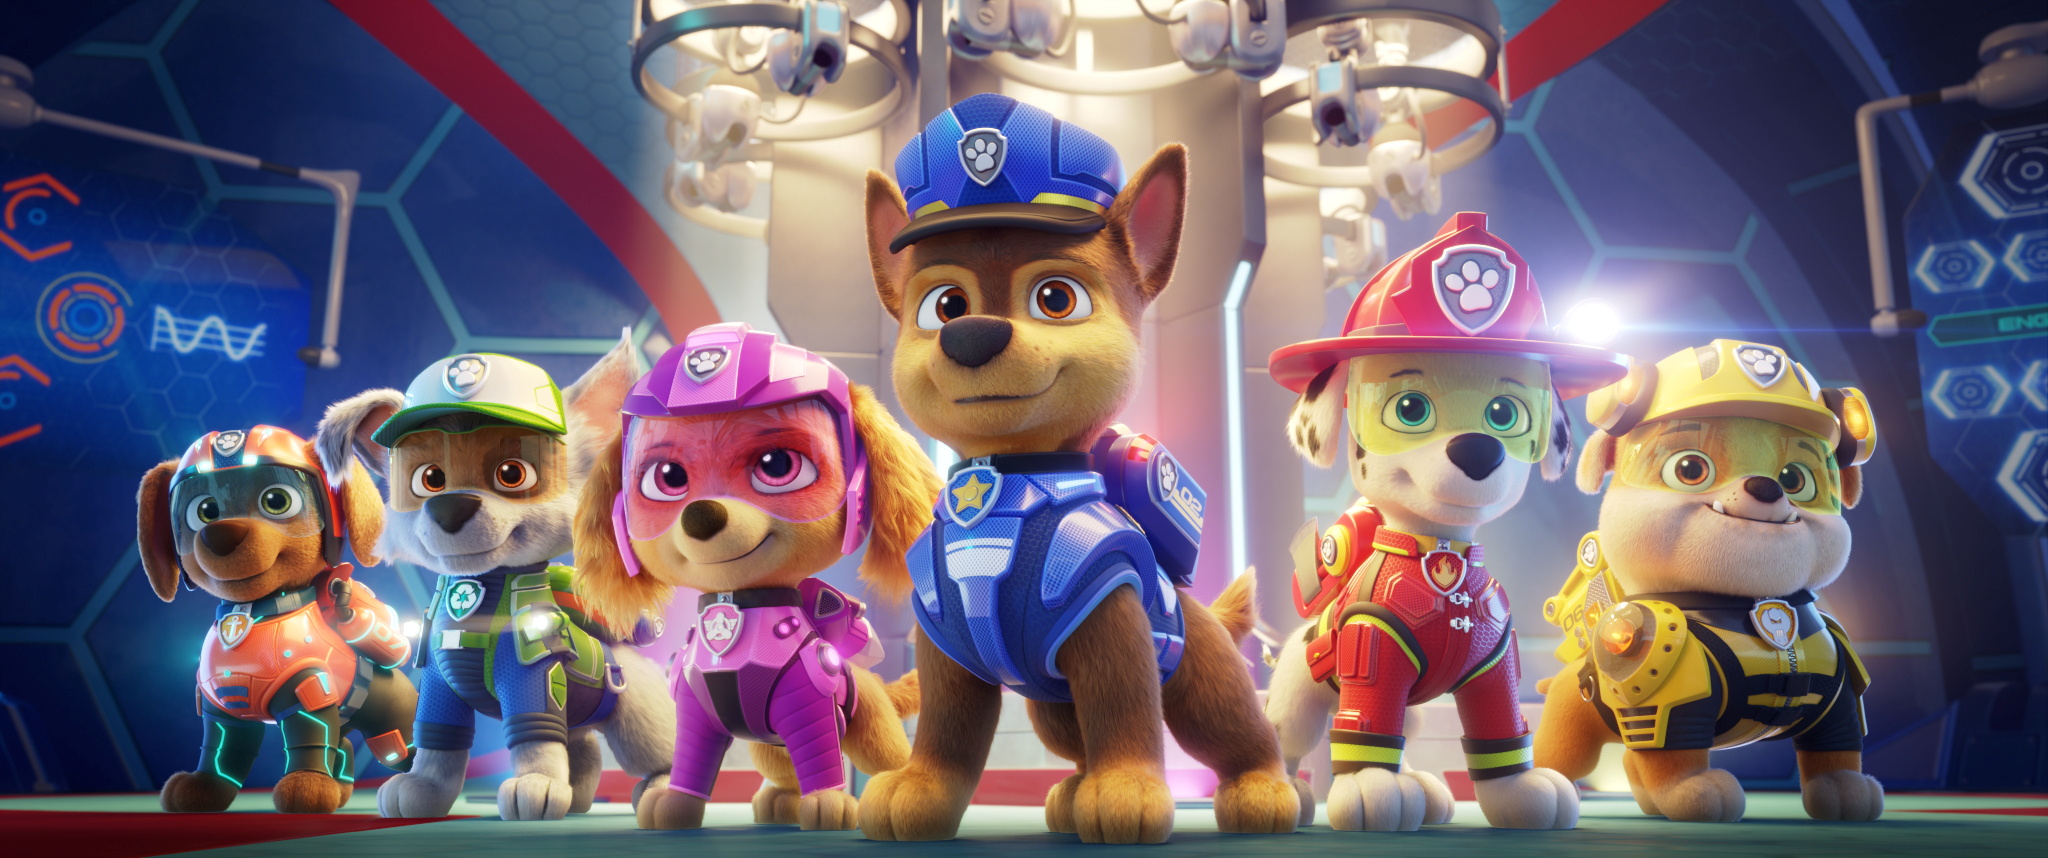 Zuma (voiced by Shayle Simons), Rocky (voiced by Callum Shoniker), Skye (voiced by Lilly Bartlam), Chase (voiced by Iain Armitage), Marshall (voiced by Kingsley Marshall), and Rubble (voiced by Keegan Hedley) in PAW PAT